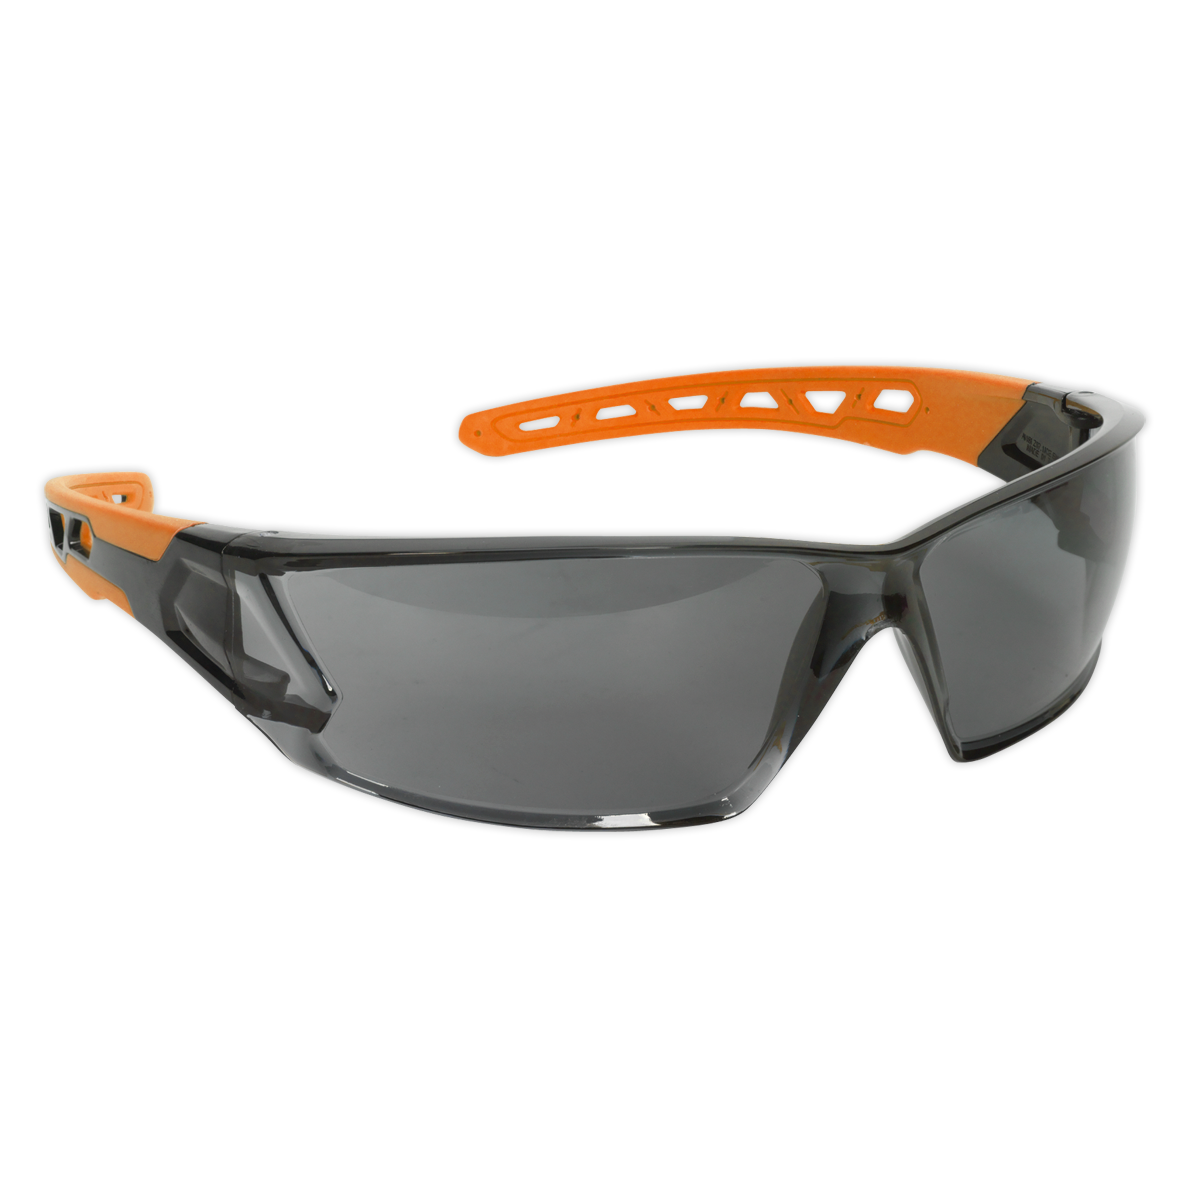 Sealey Safety Spectacles - Anti-Glare Lens